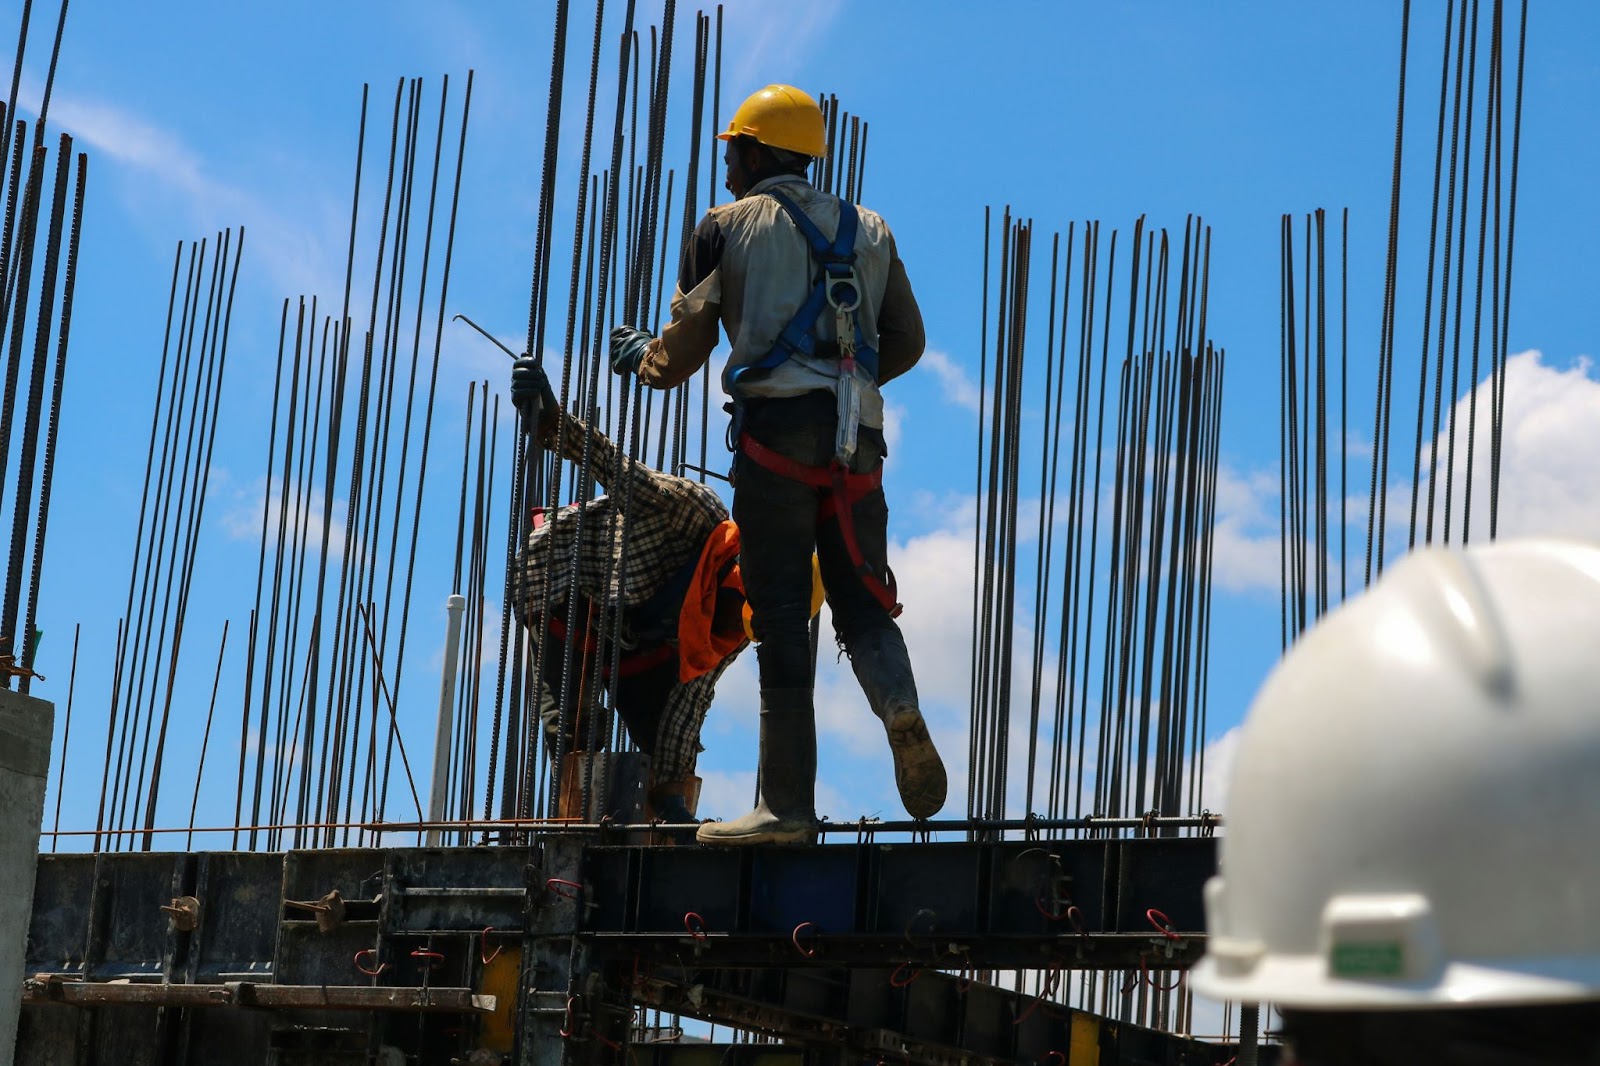 Construction workers stand on top of a metal structure.